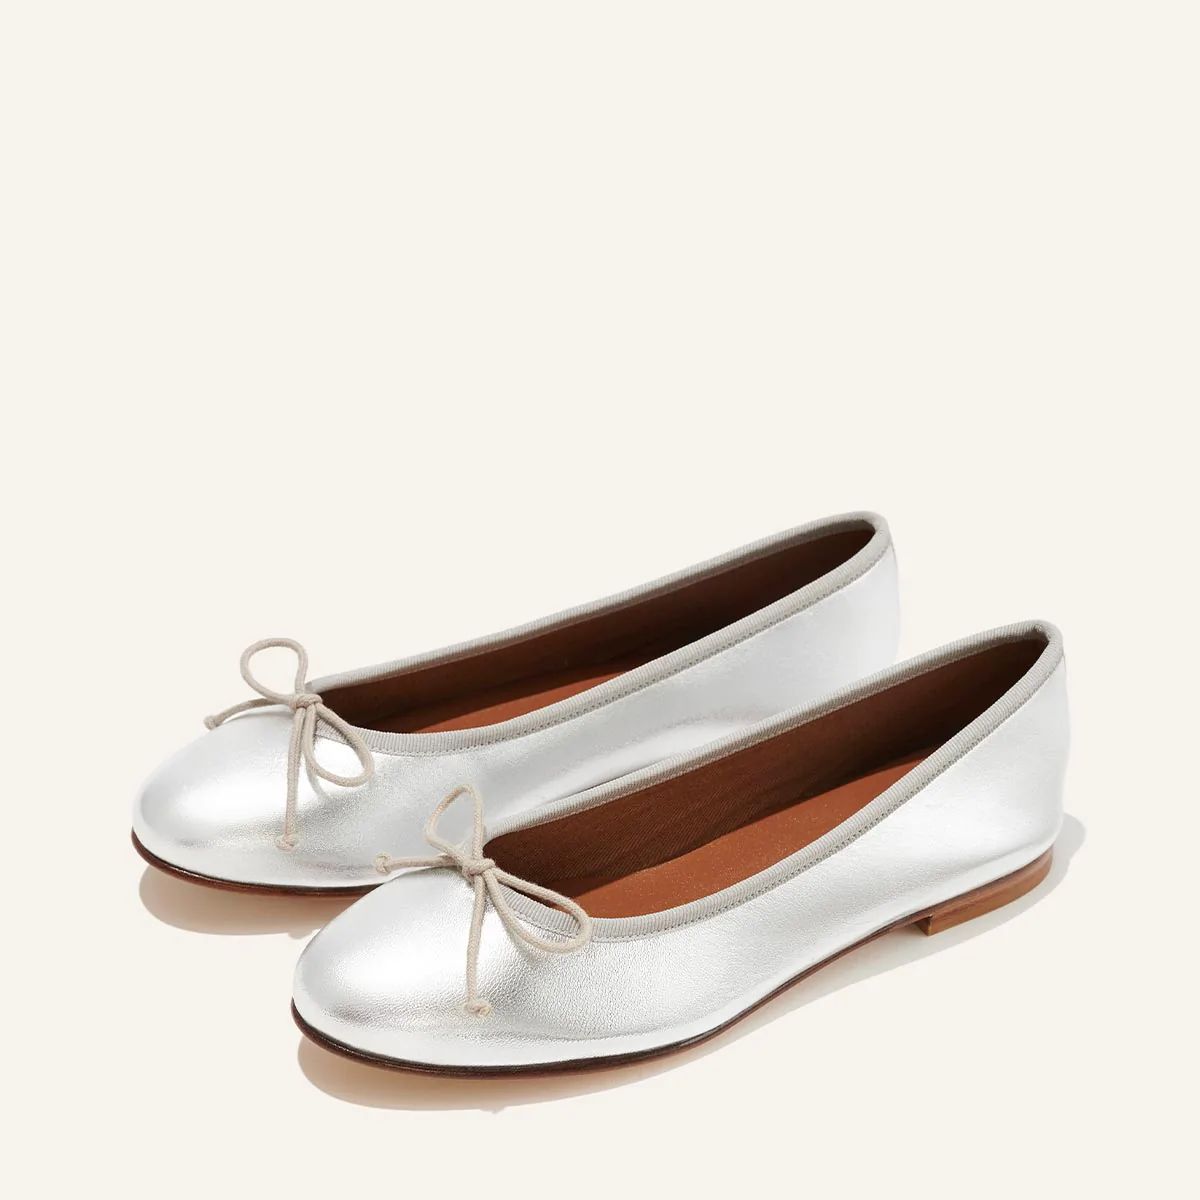 The Demi | Luxury Handmade Ballet Flat For Ladies From Margaux | Margaux